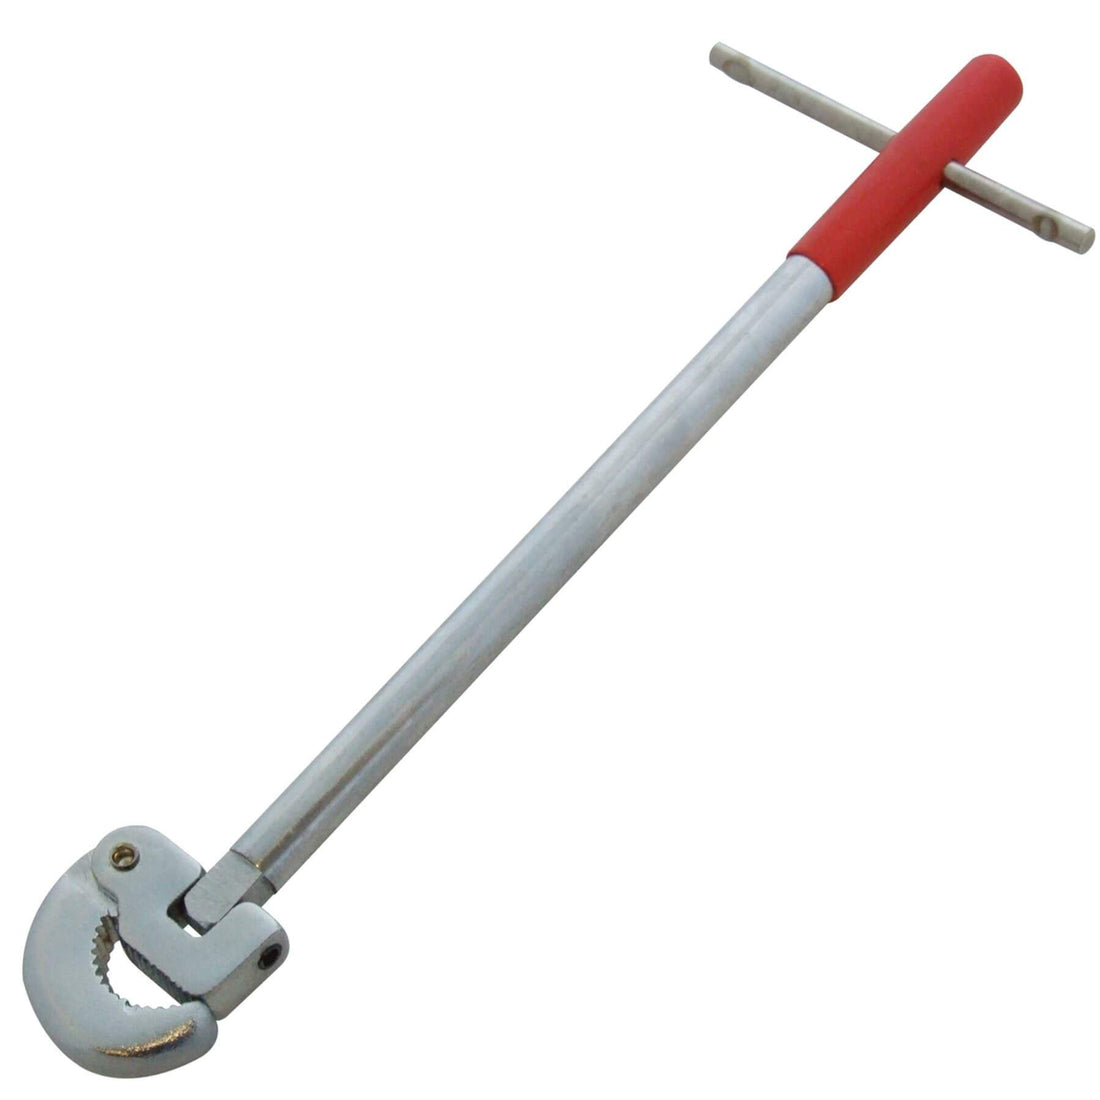 How to Choose a Basin Wrench?